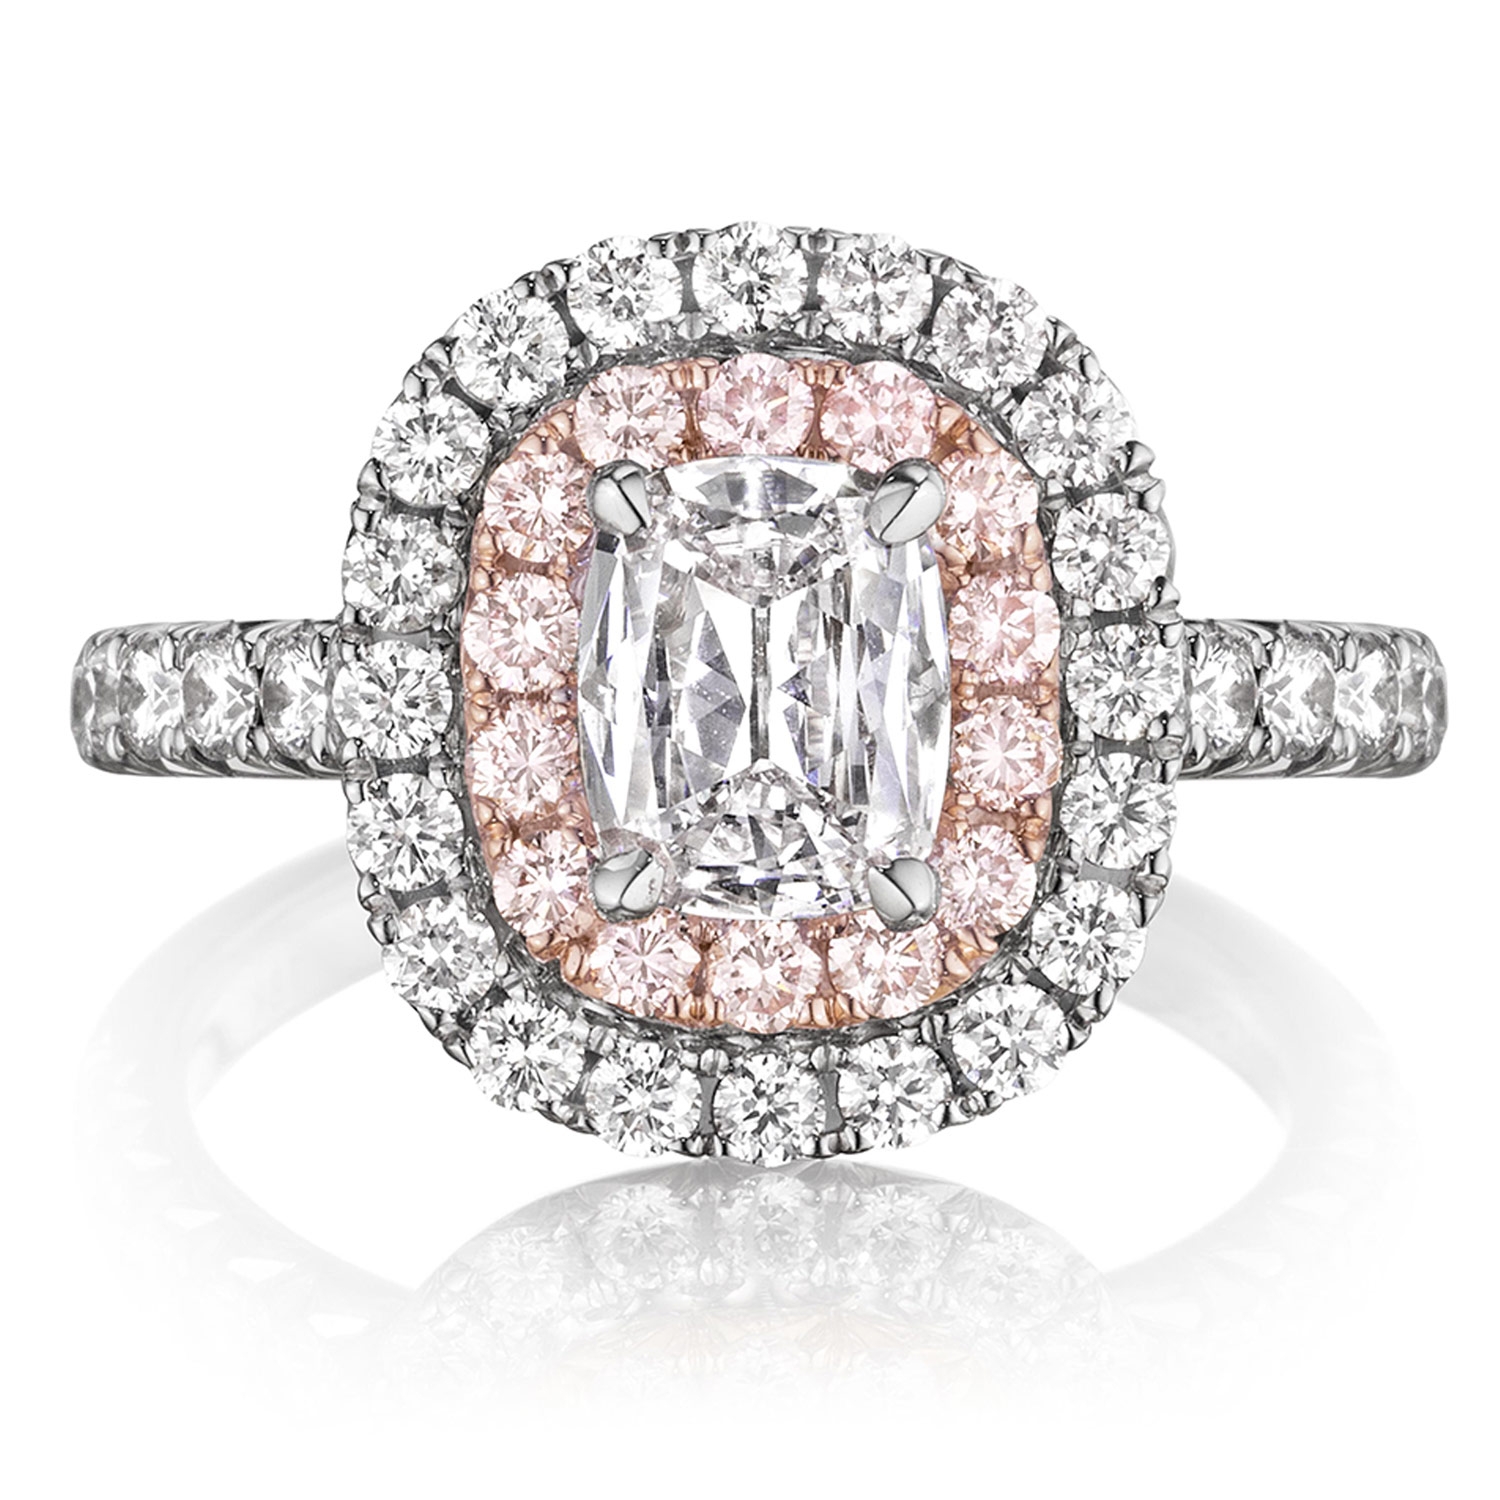 Henri Daussi AQP Cushion Double Halo with Pink Diamonds Engagement Ring